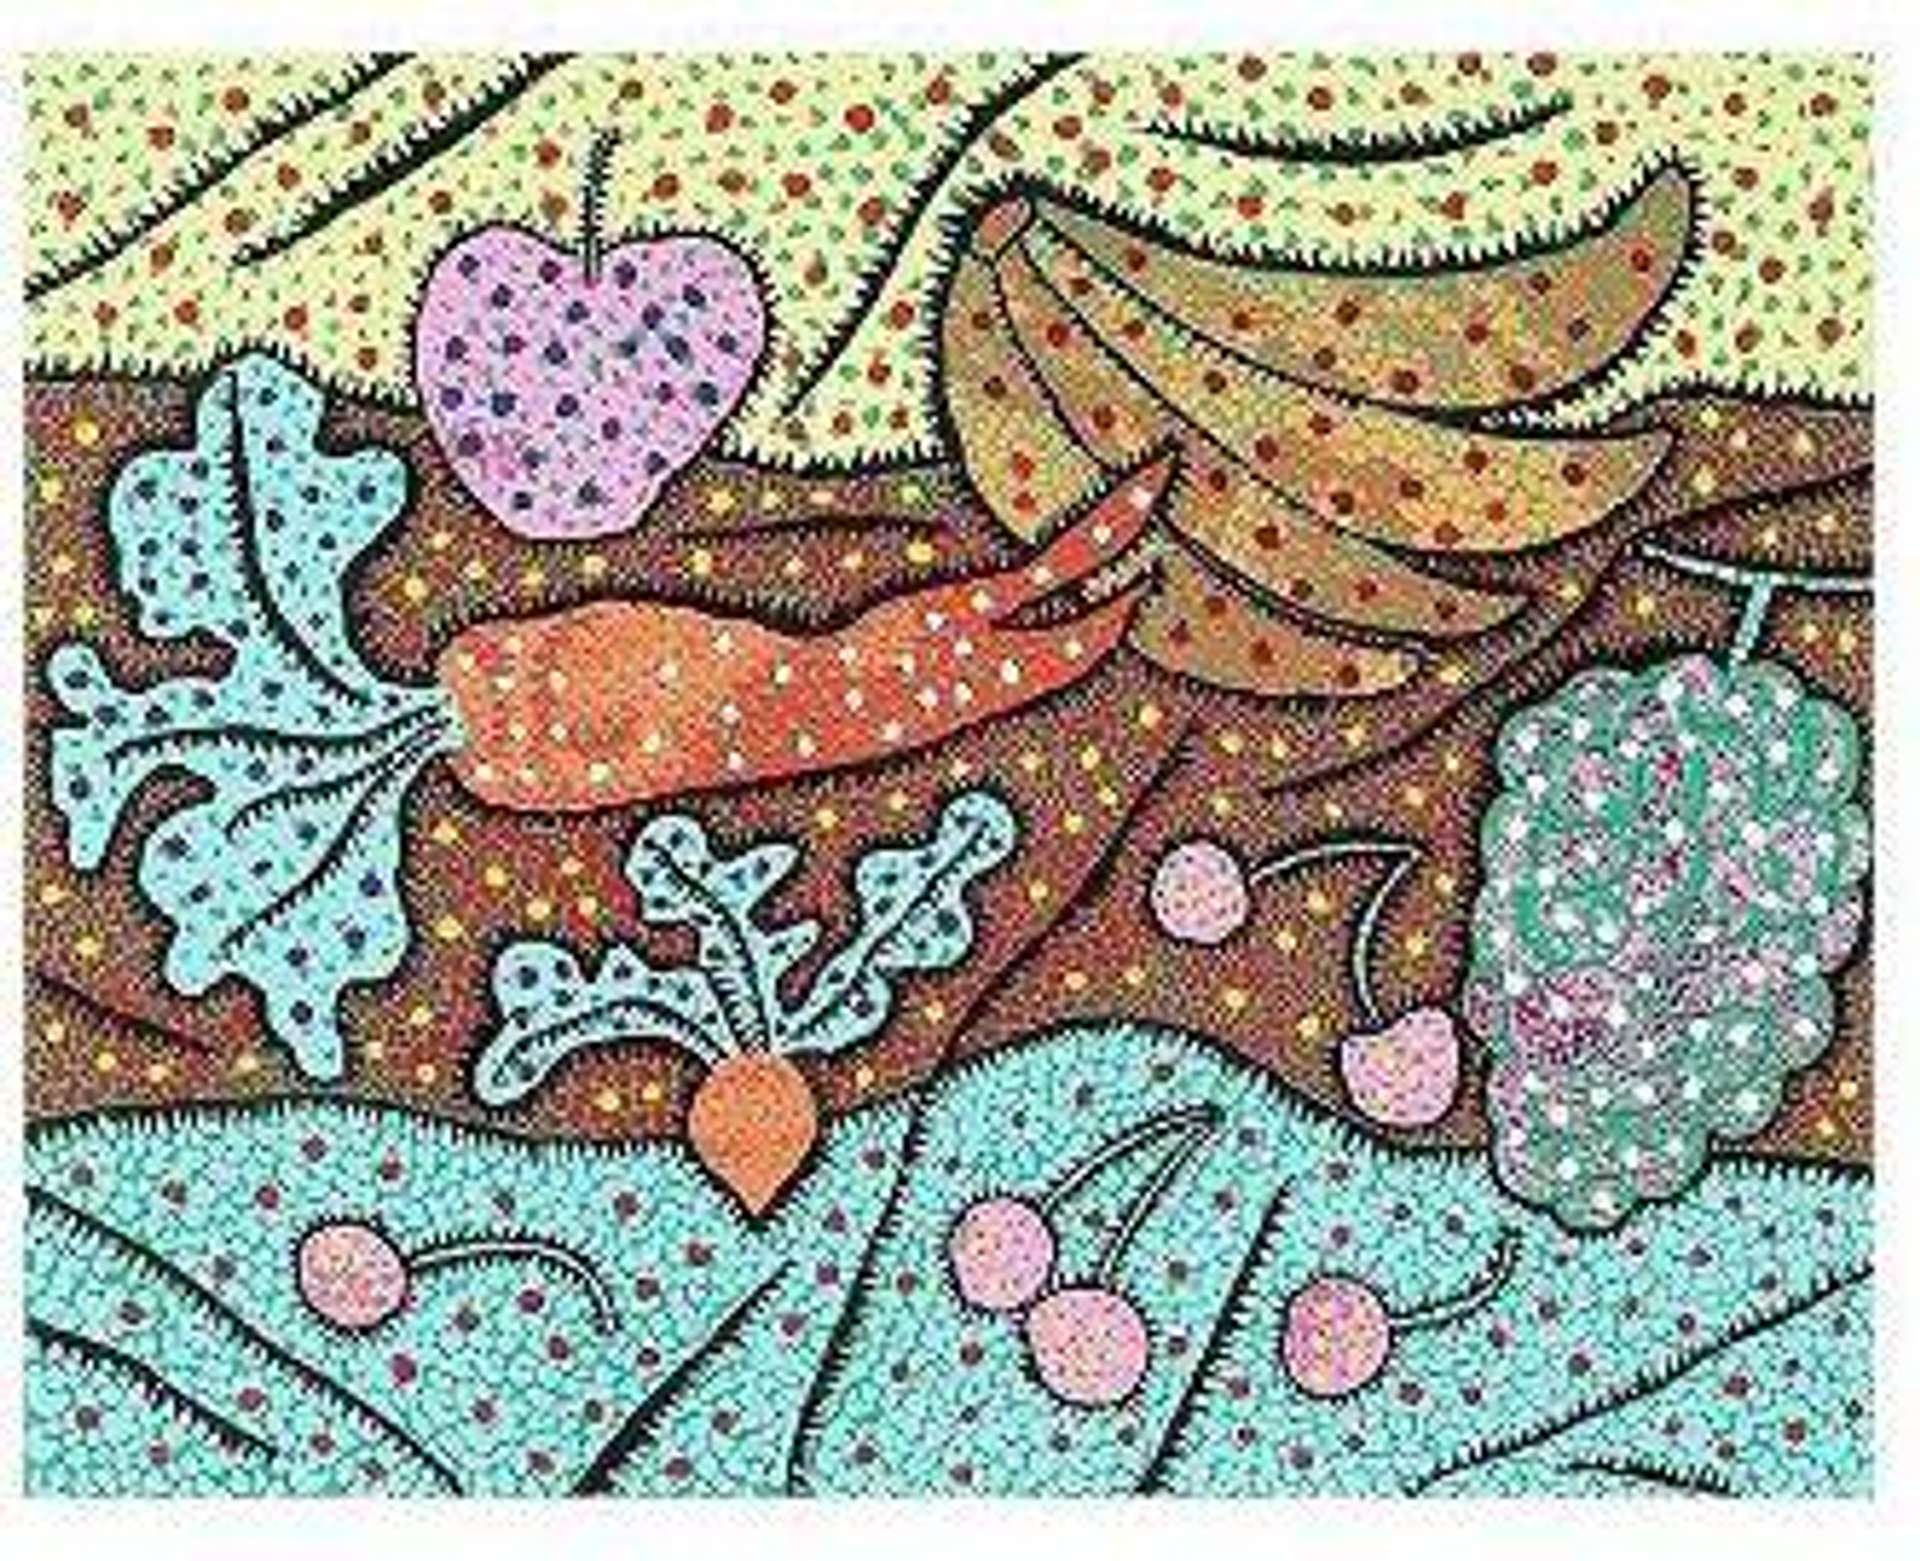 Yayoi Kusama: Standing In The Visionary Field - Signed Print